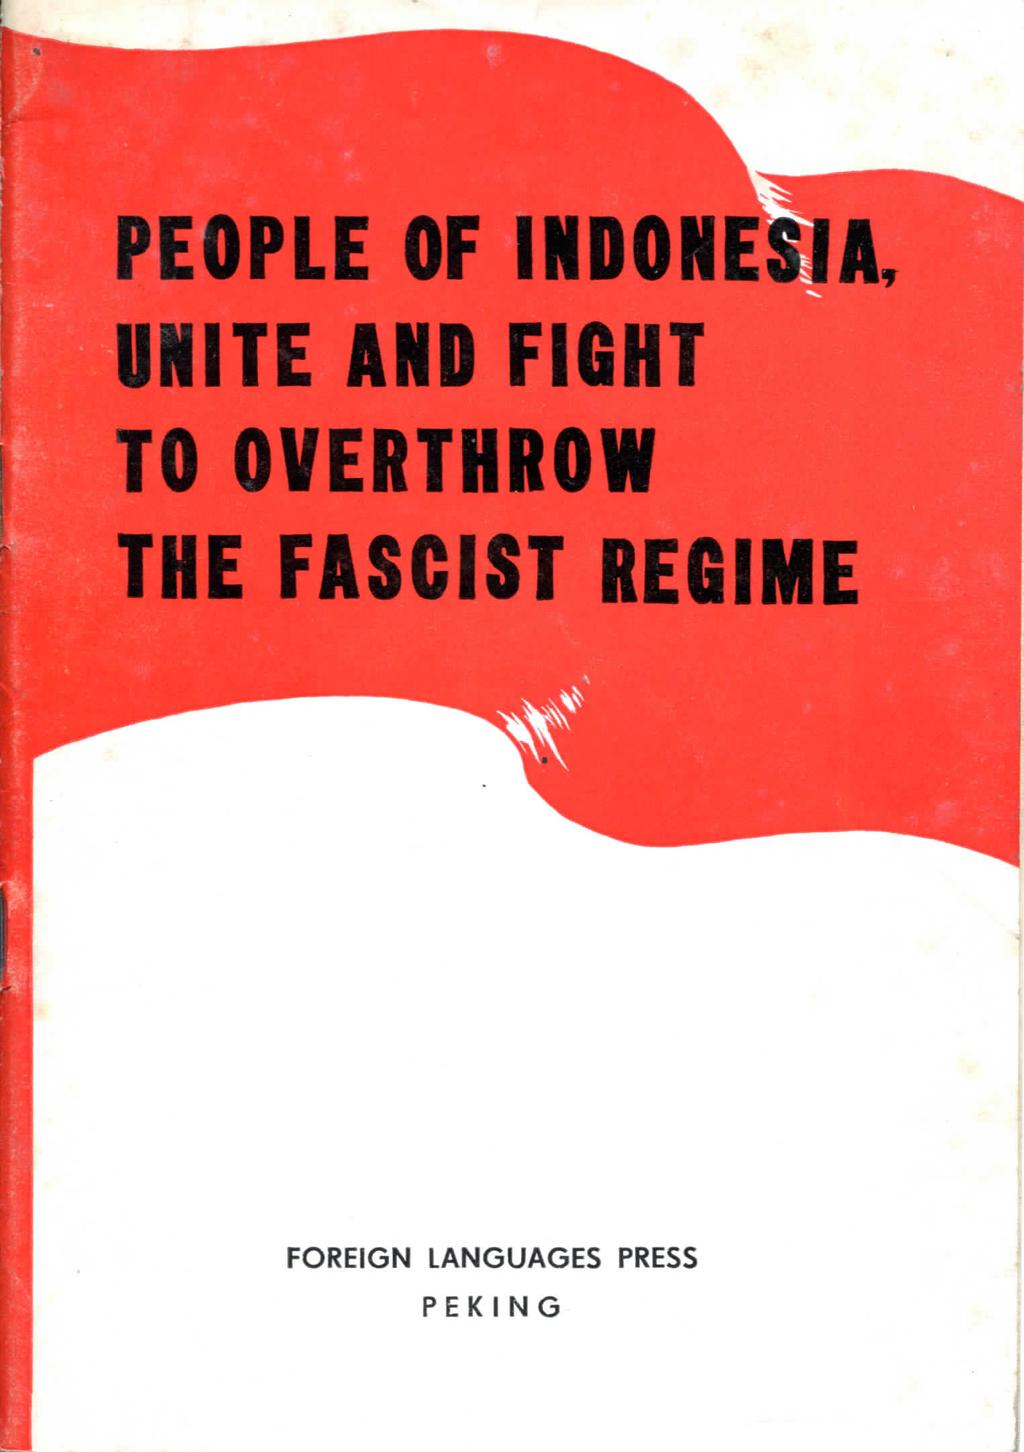 PEOPLE OF INDONESIA, UNITE AND FIGHT TO OVERTHROW